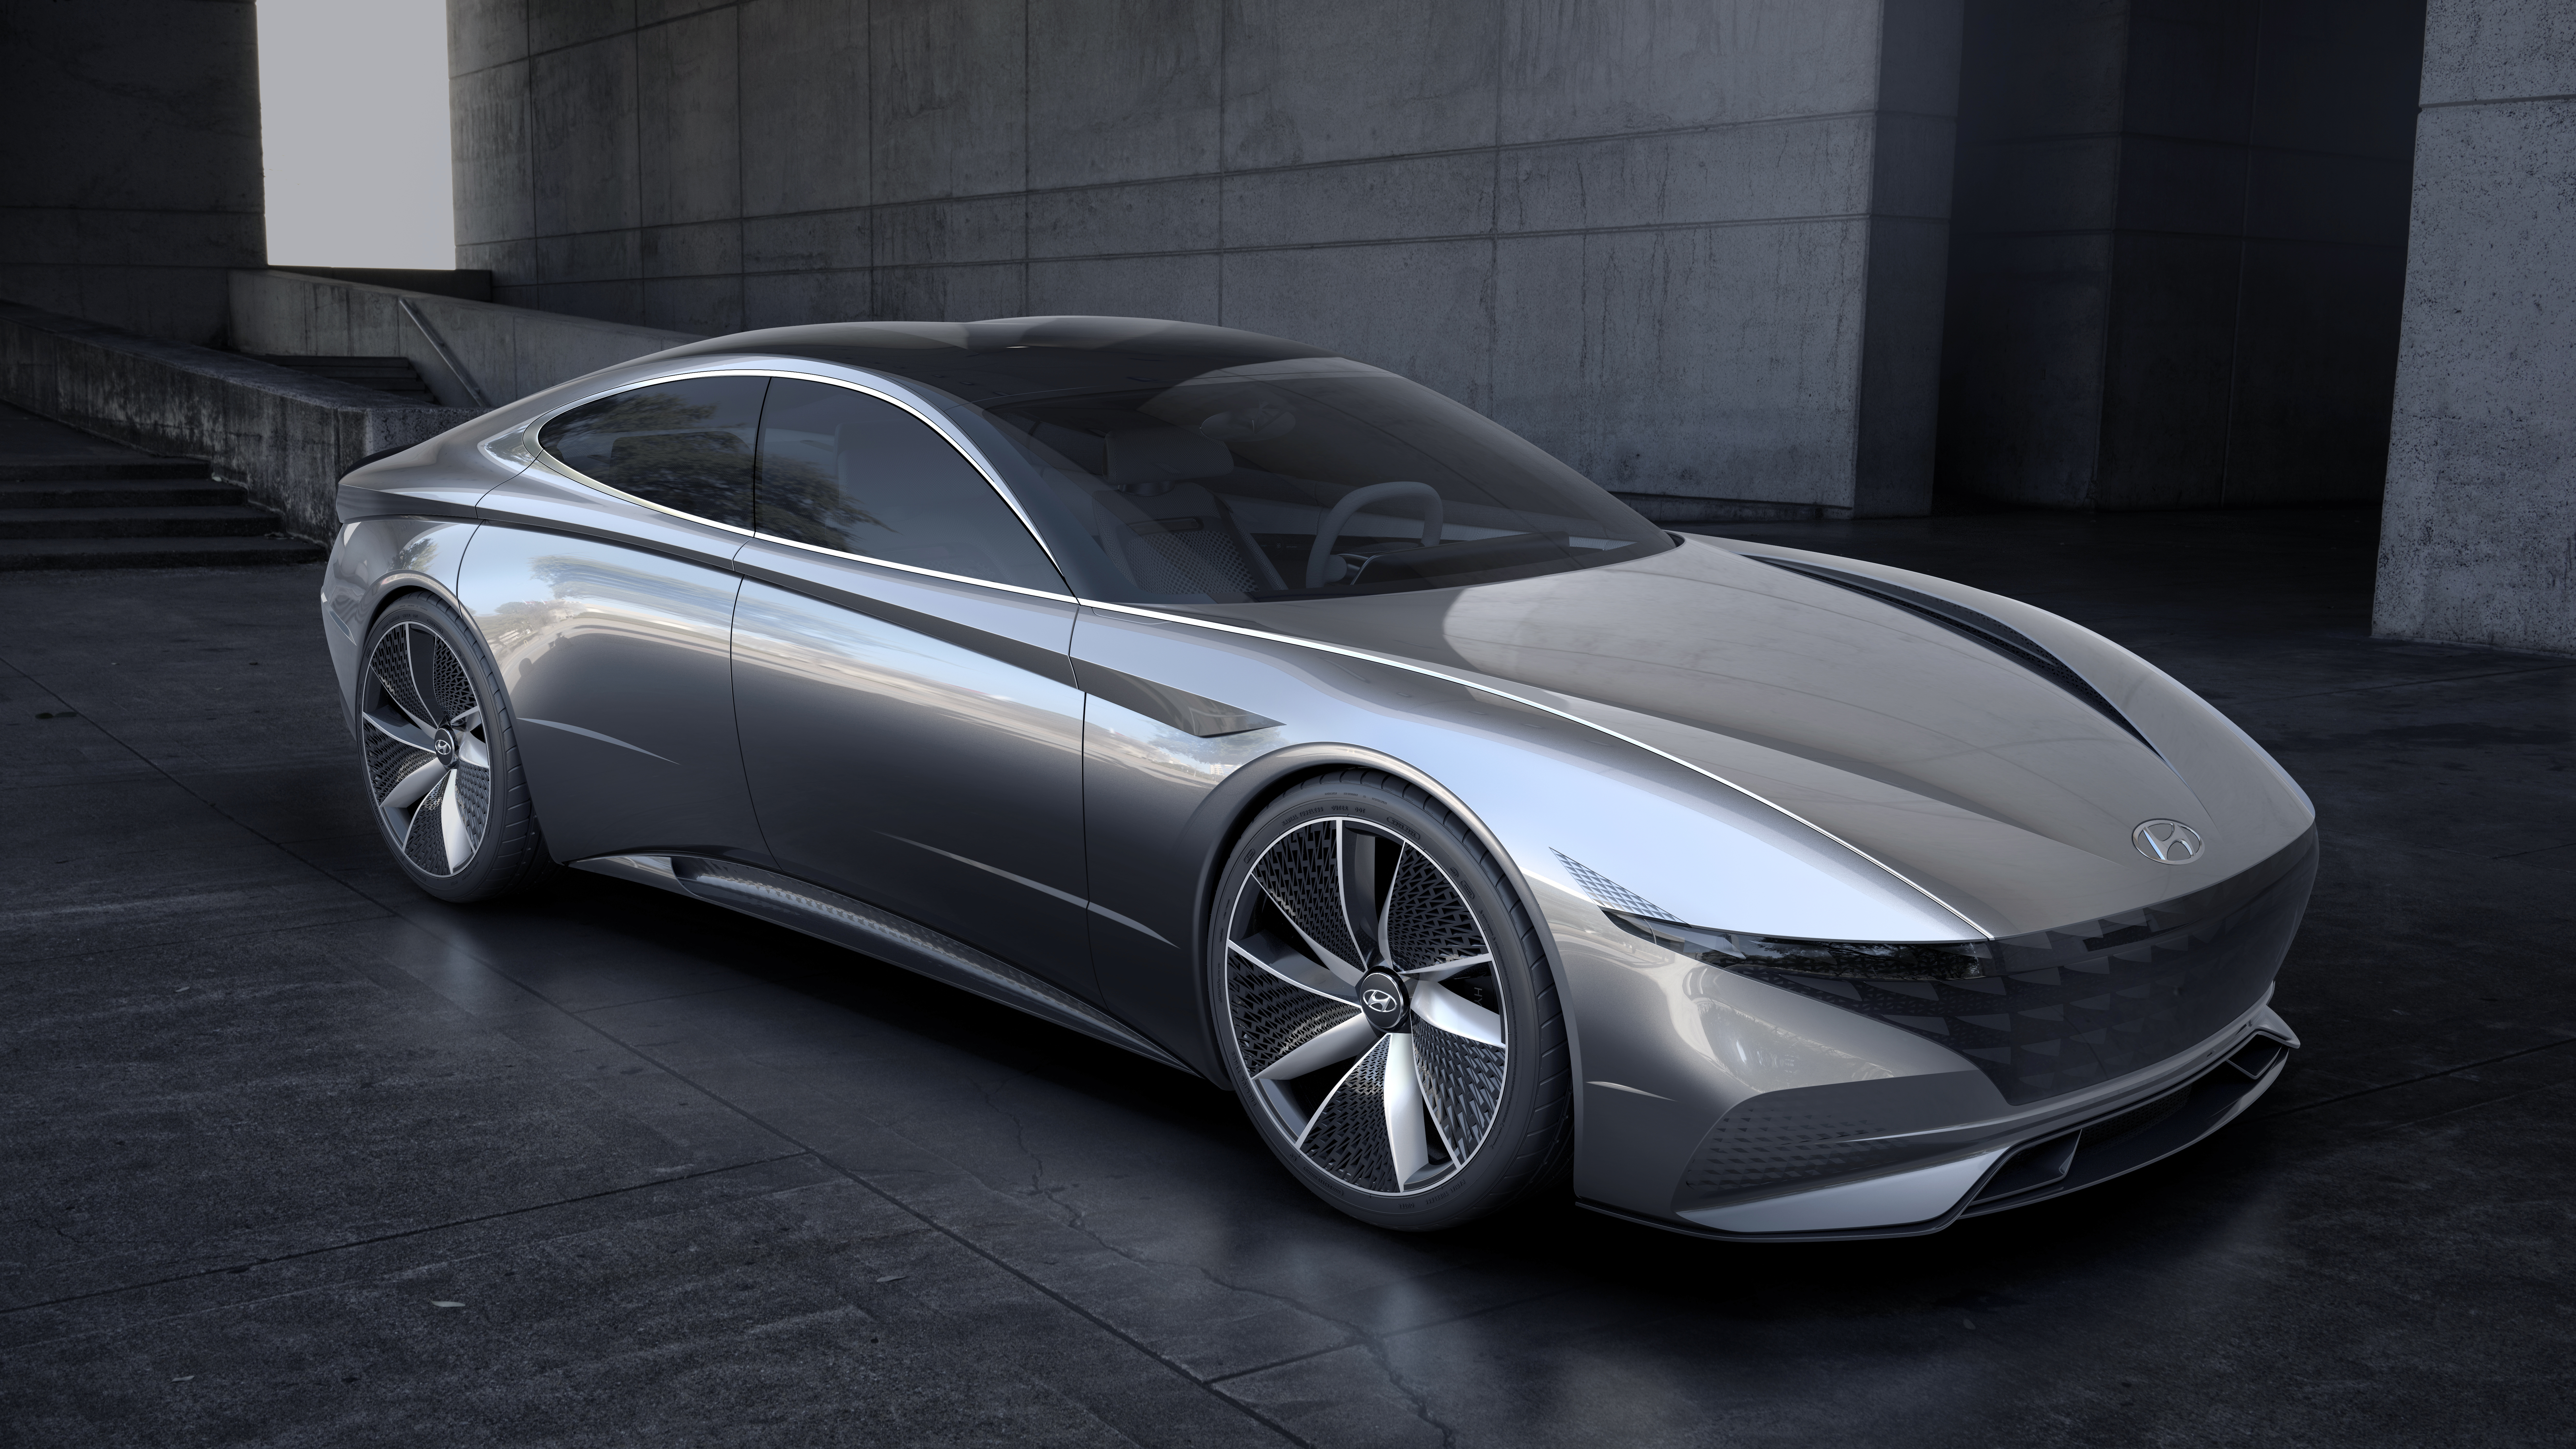 Hyundai Motor Shows Glimpse of Future Design with ‘Le Fil Rouge (HDC-1)’ Concept at Geneva Motor Show